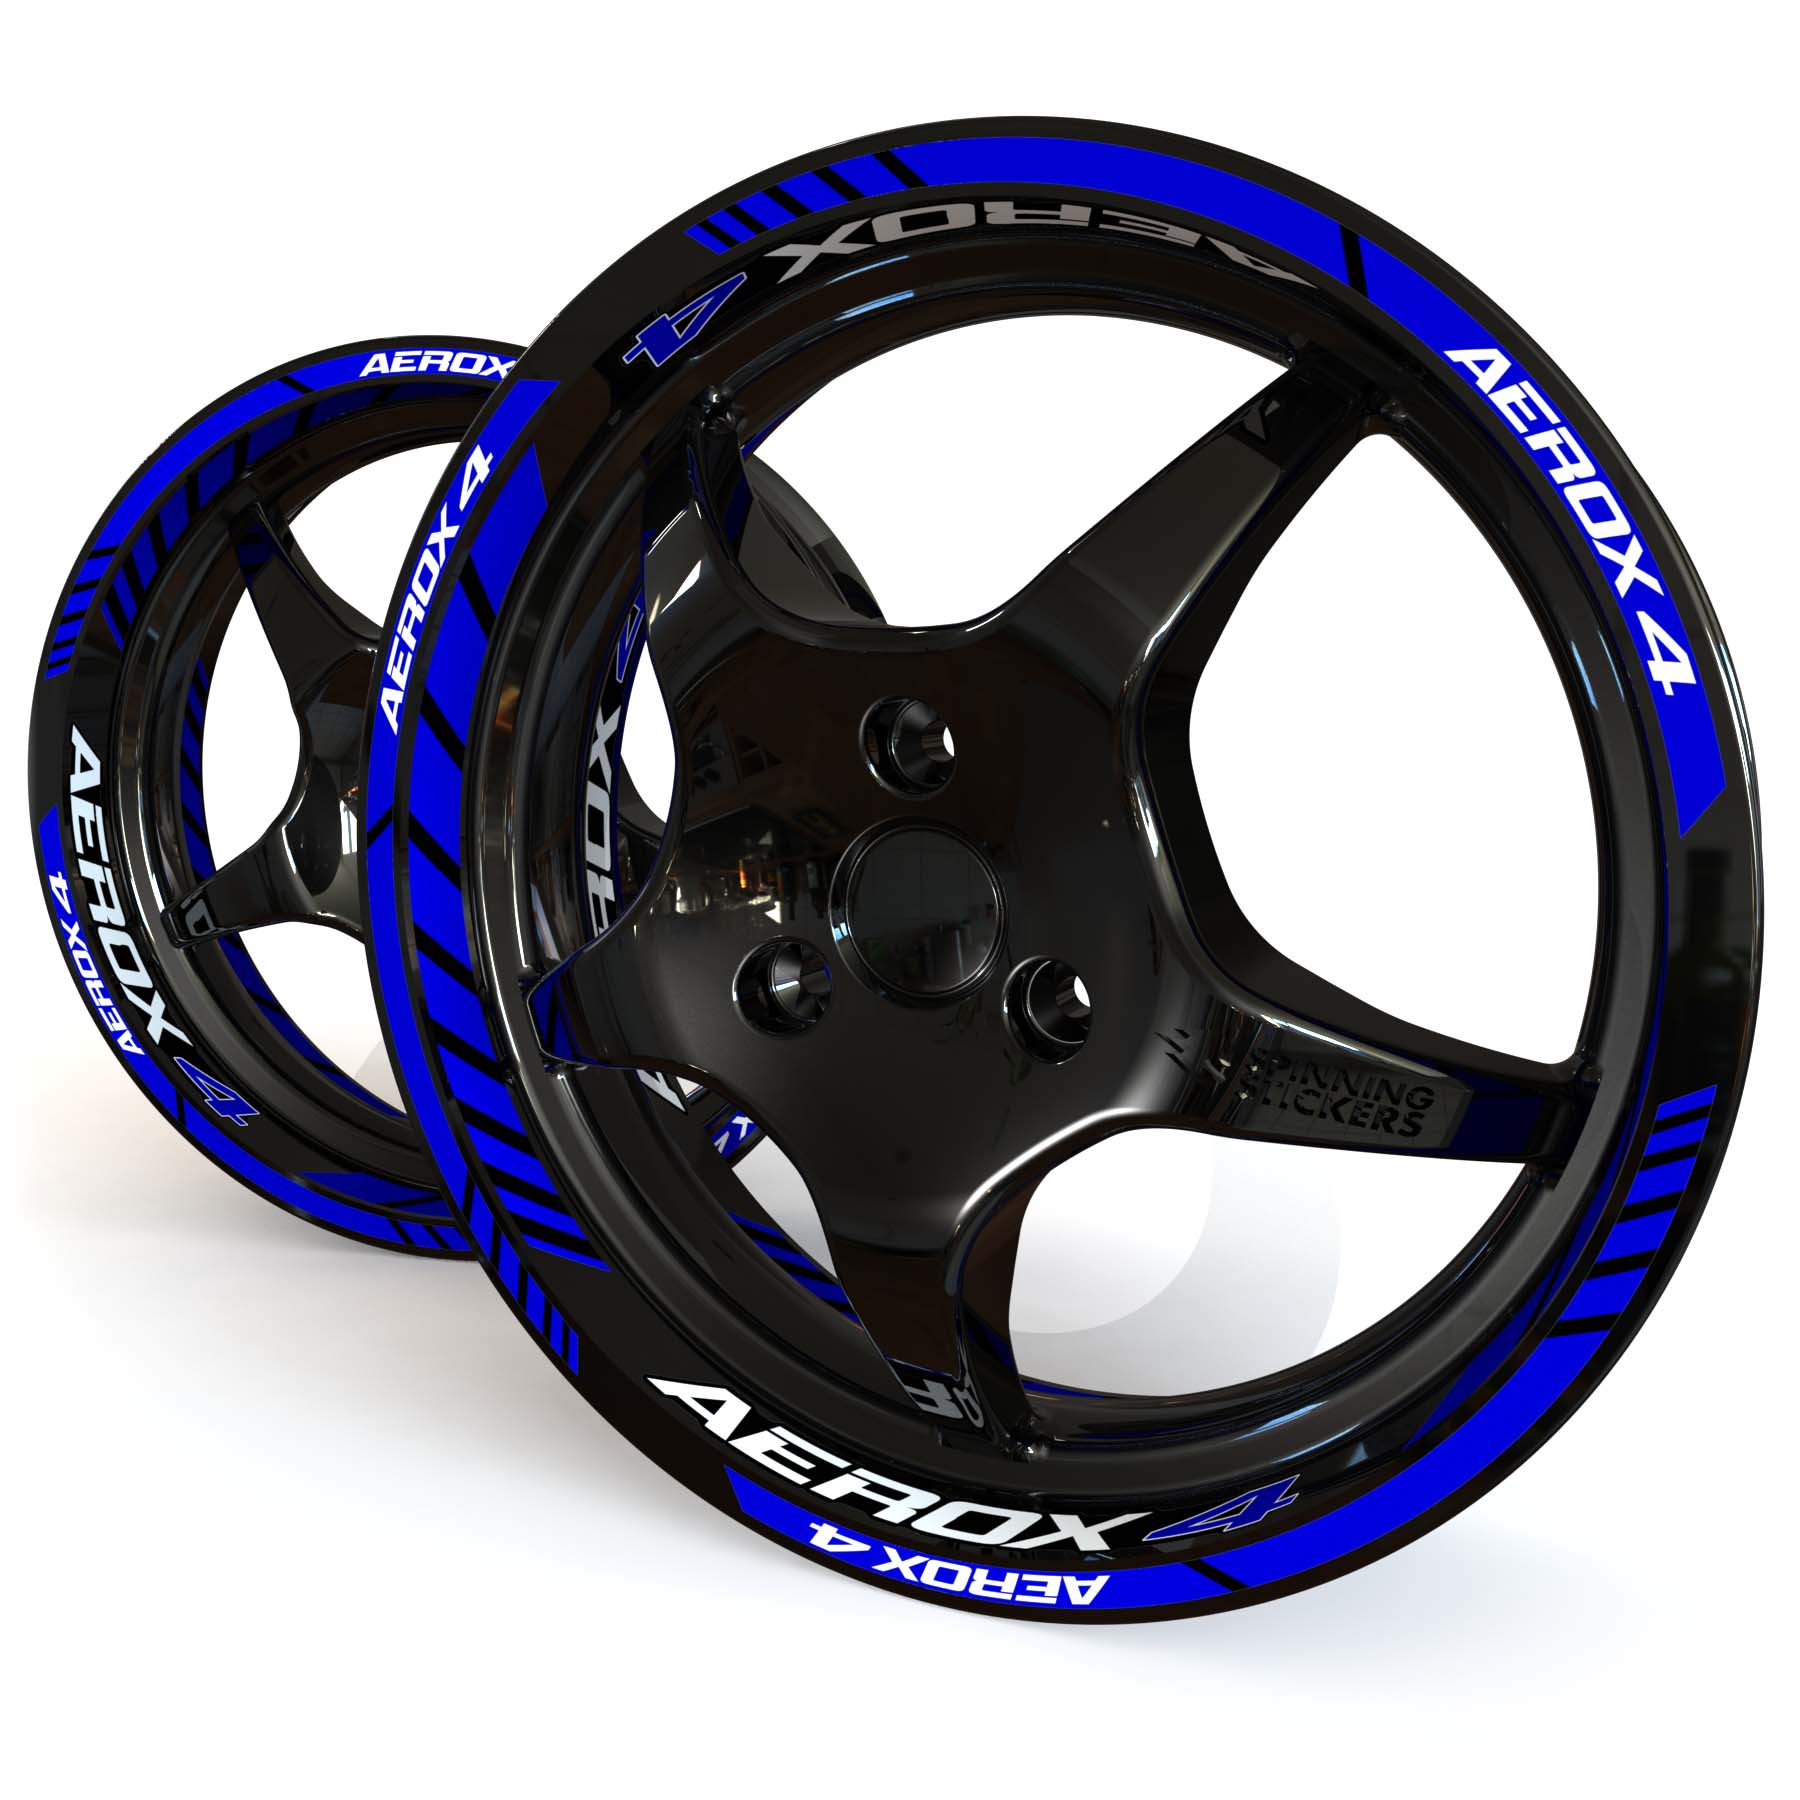 Blue and white Yamaha Aerox 4 wheel stickers on a black 12 inch moped rim